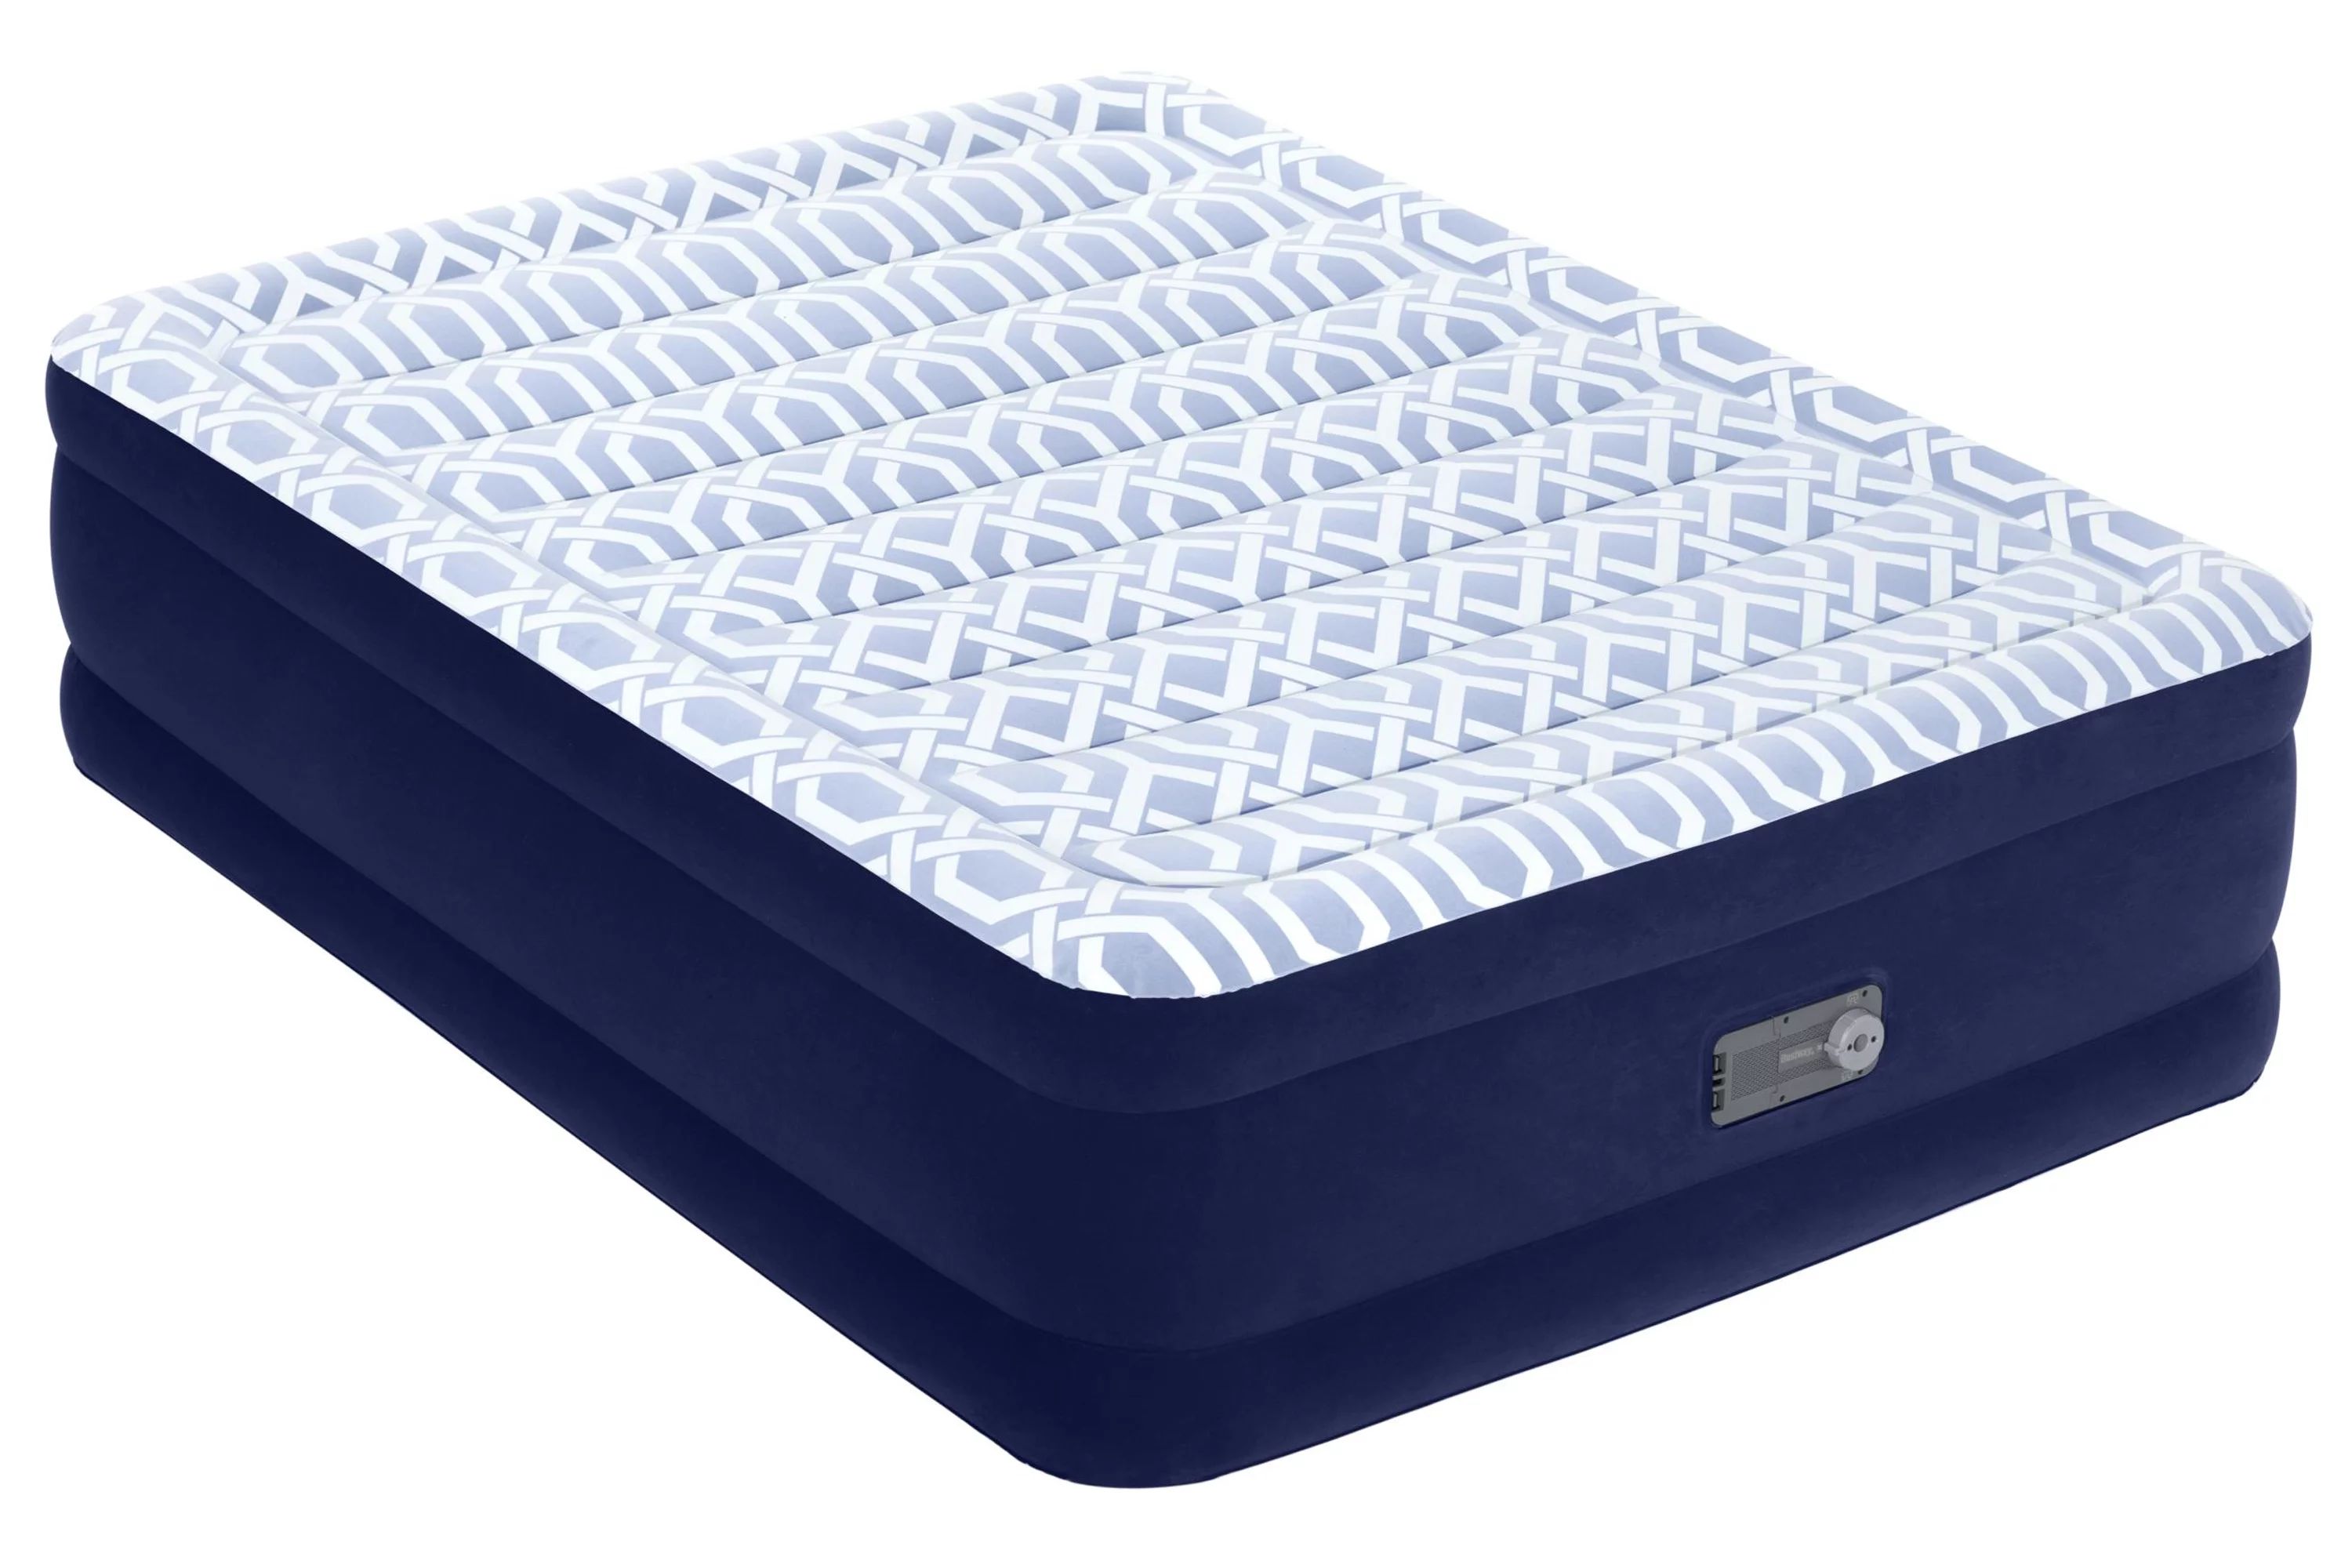 Bestway Fashion Flock 20 inch Queen Air Mattress with Built-in Pump and Antimicrobial Coating | Walmart (US)